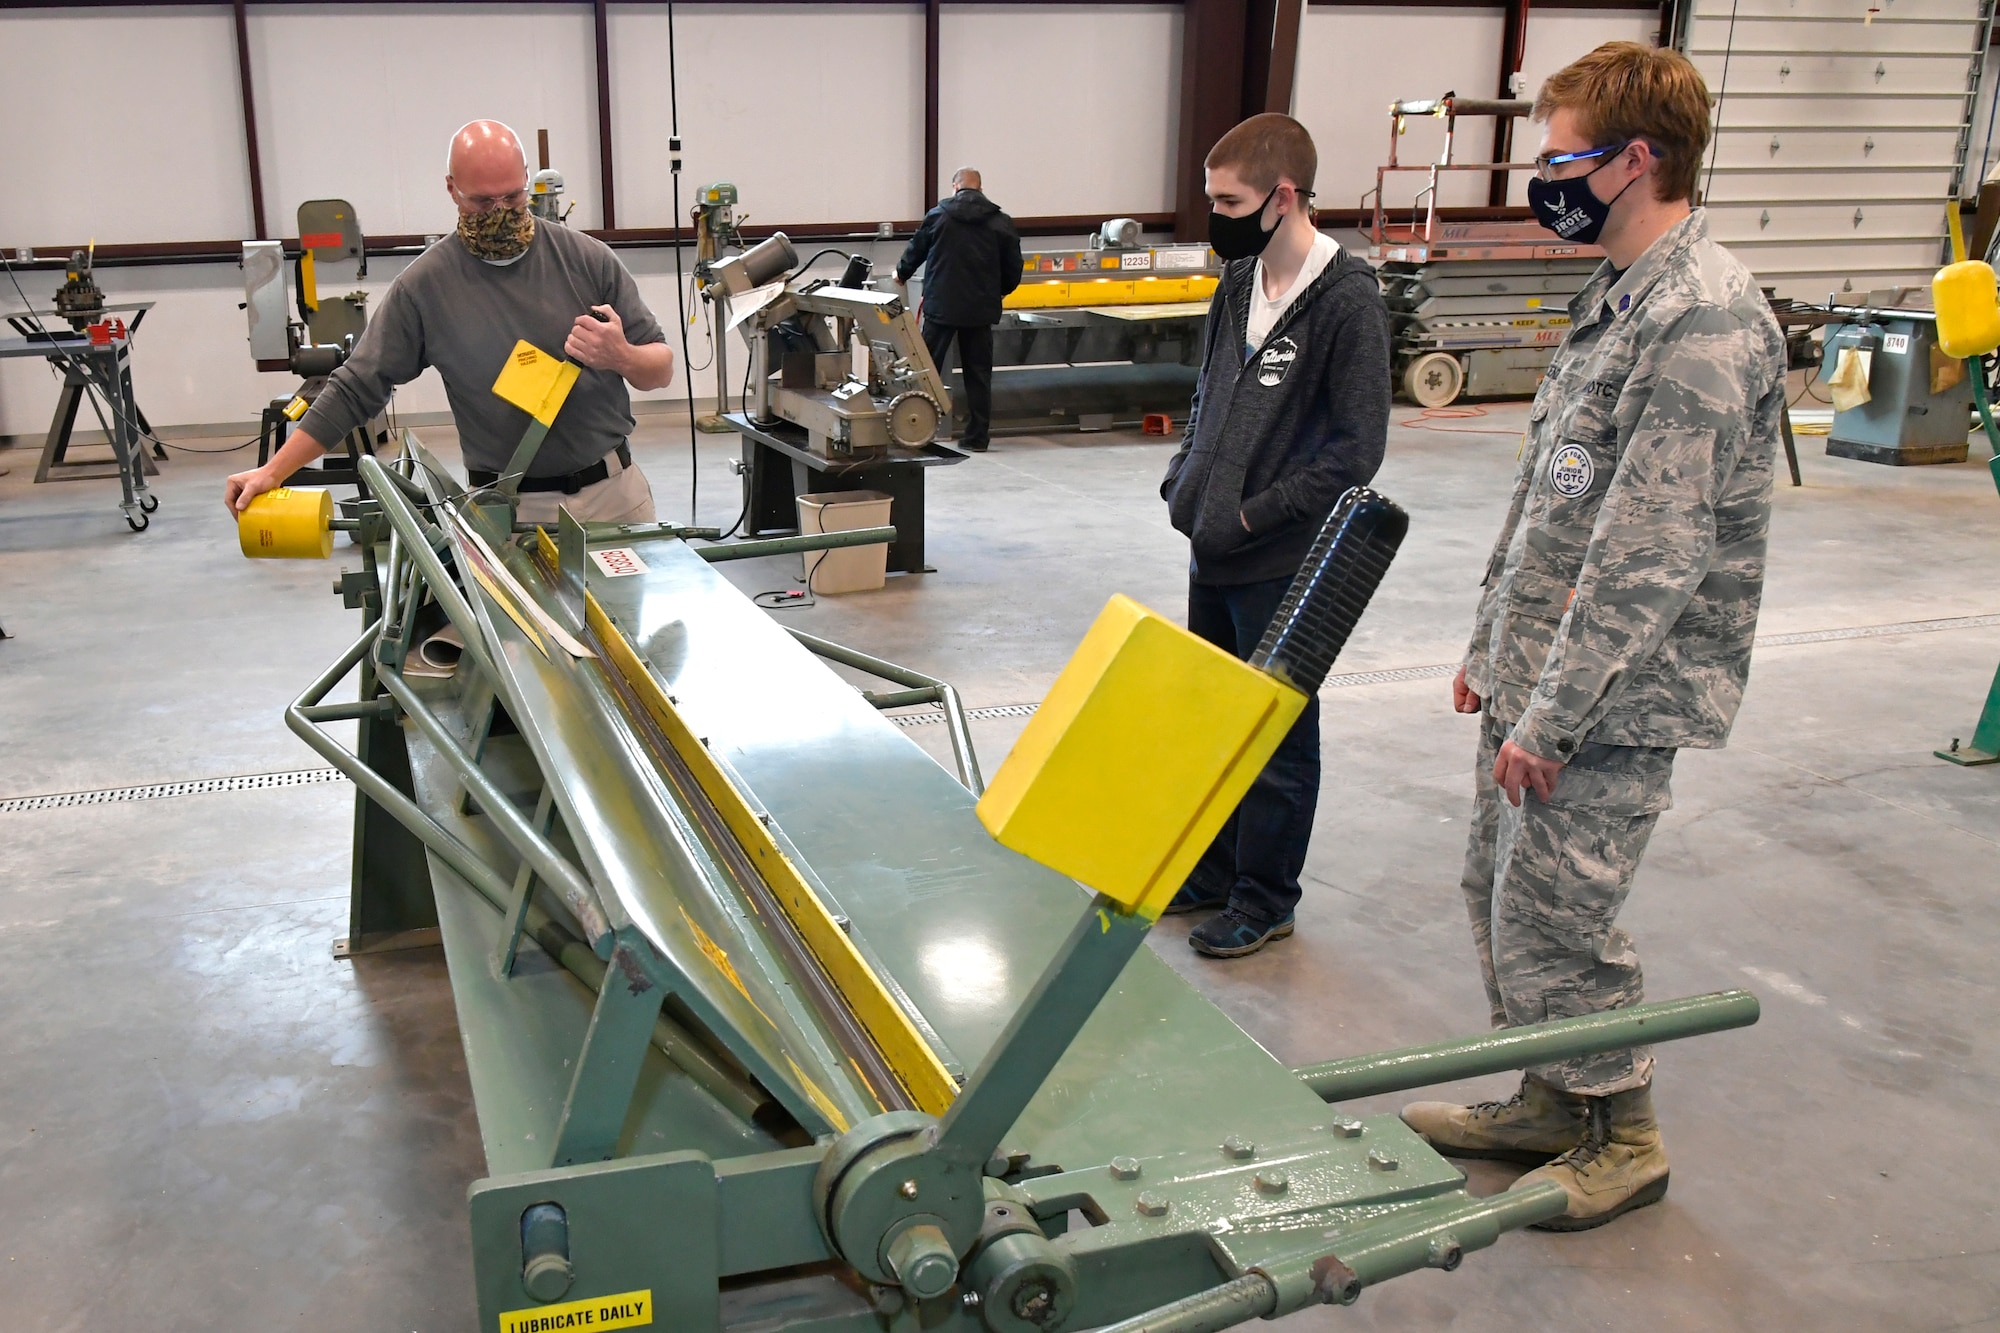 (Left to right) Darrel Gronau, aviation structure repair instructor, teaches metal forming and tool safety to Isaac Jensen and Connor Innocenzi, both Utah Military Academy students.